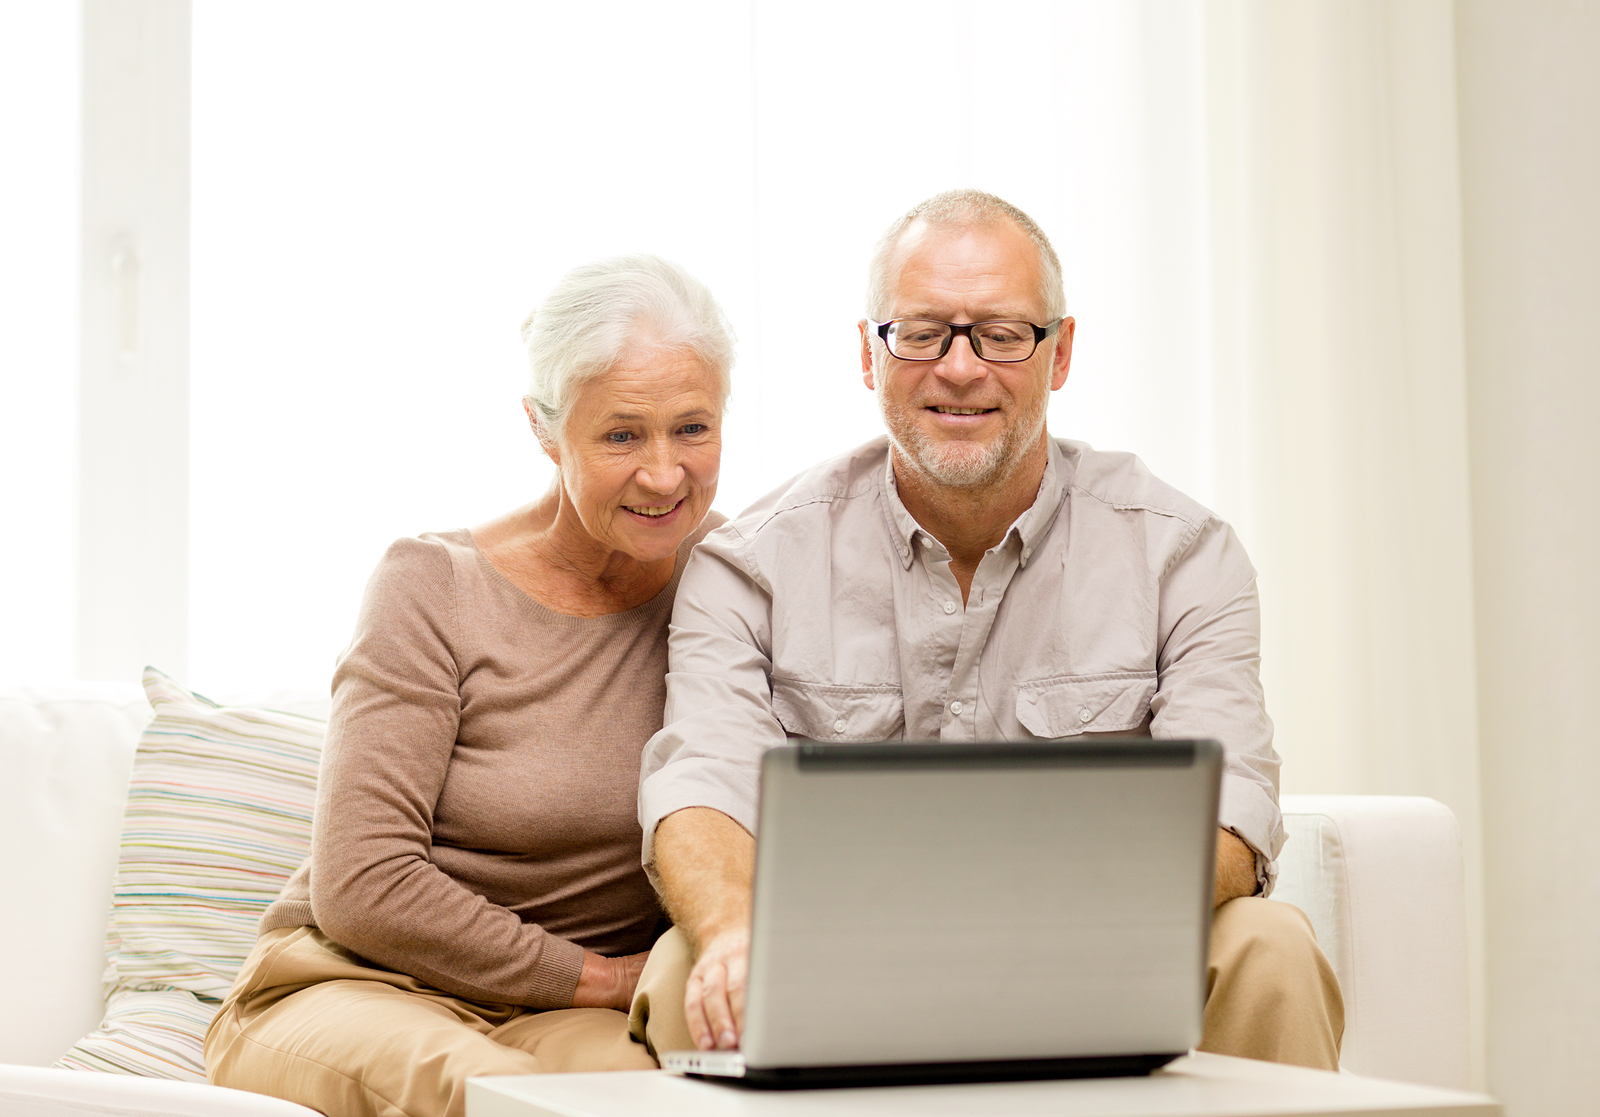 Homecare John's Creek GA - Holiday Shopping Tips for Your Parents Before They Shop Online